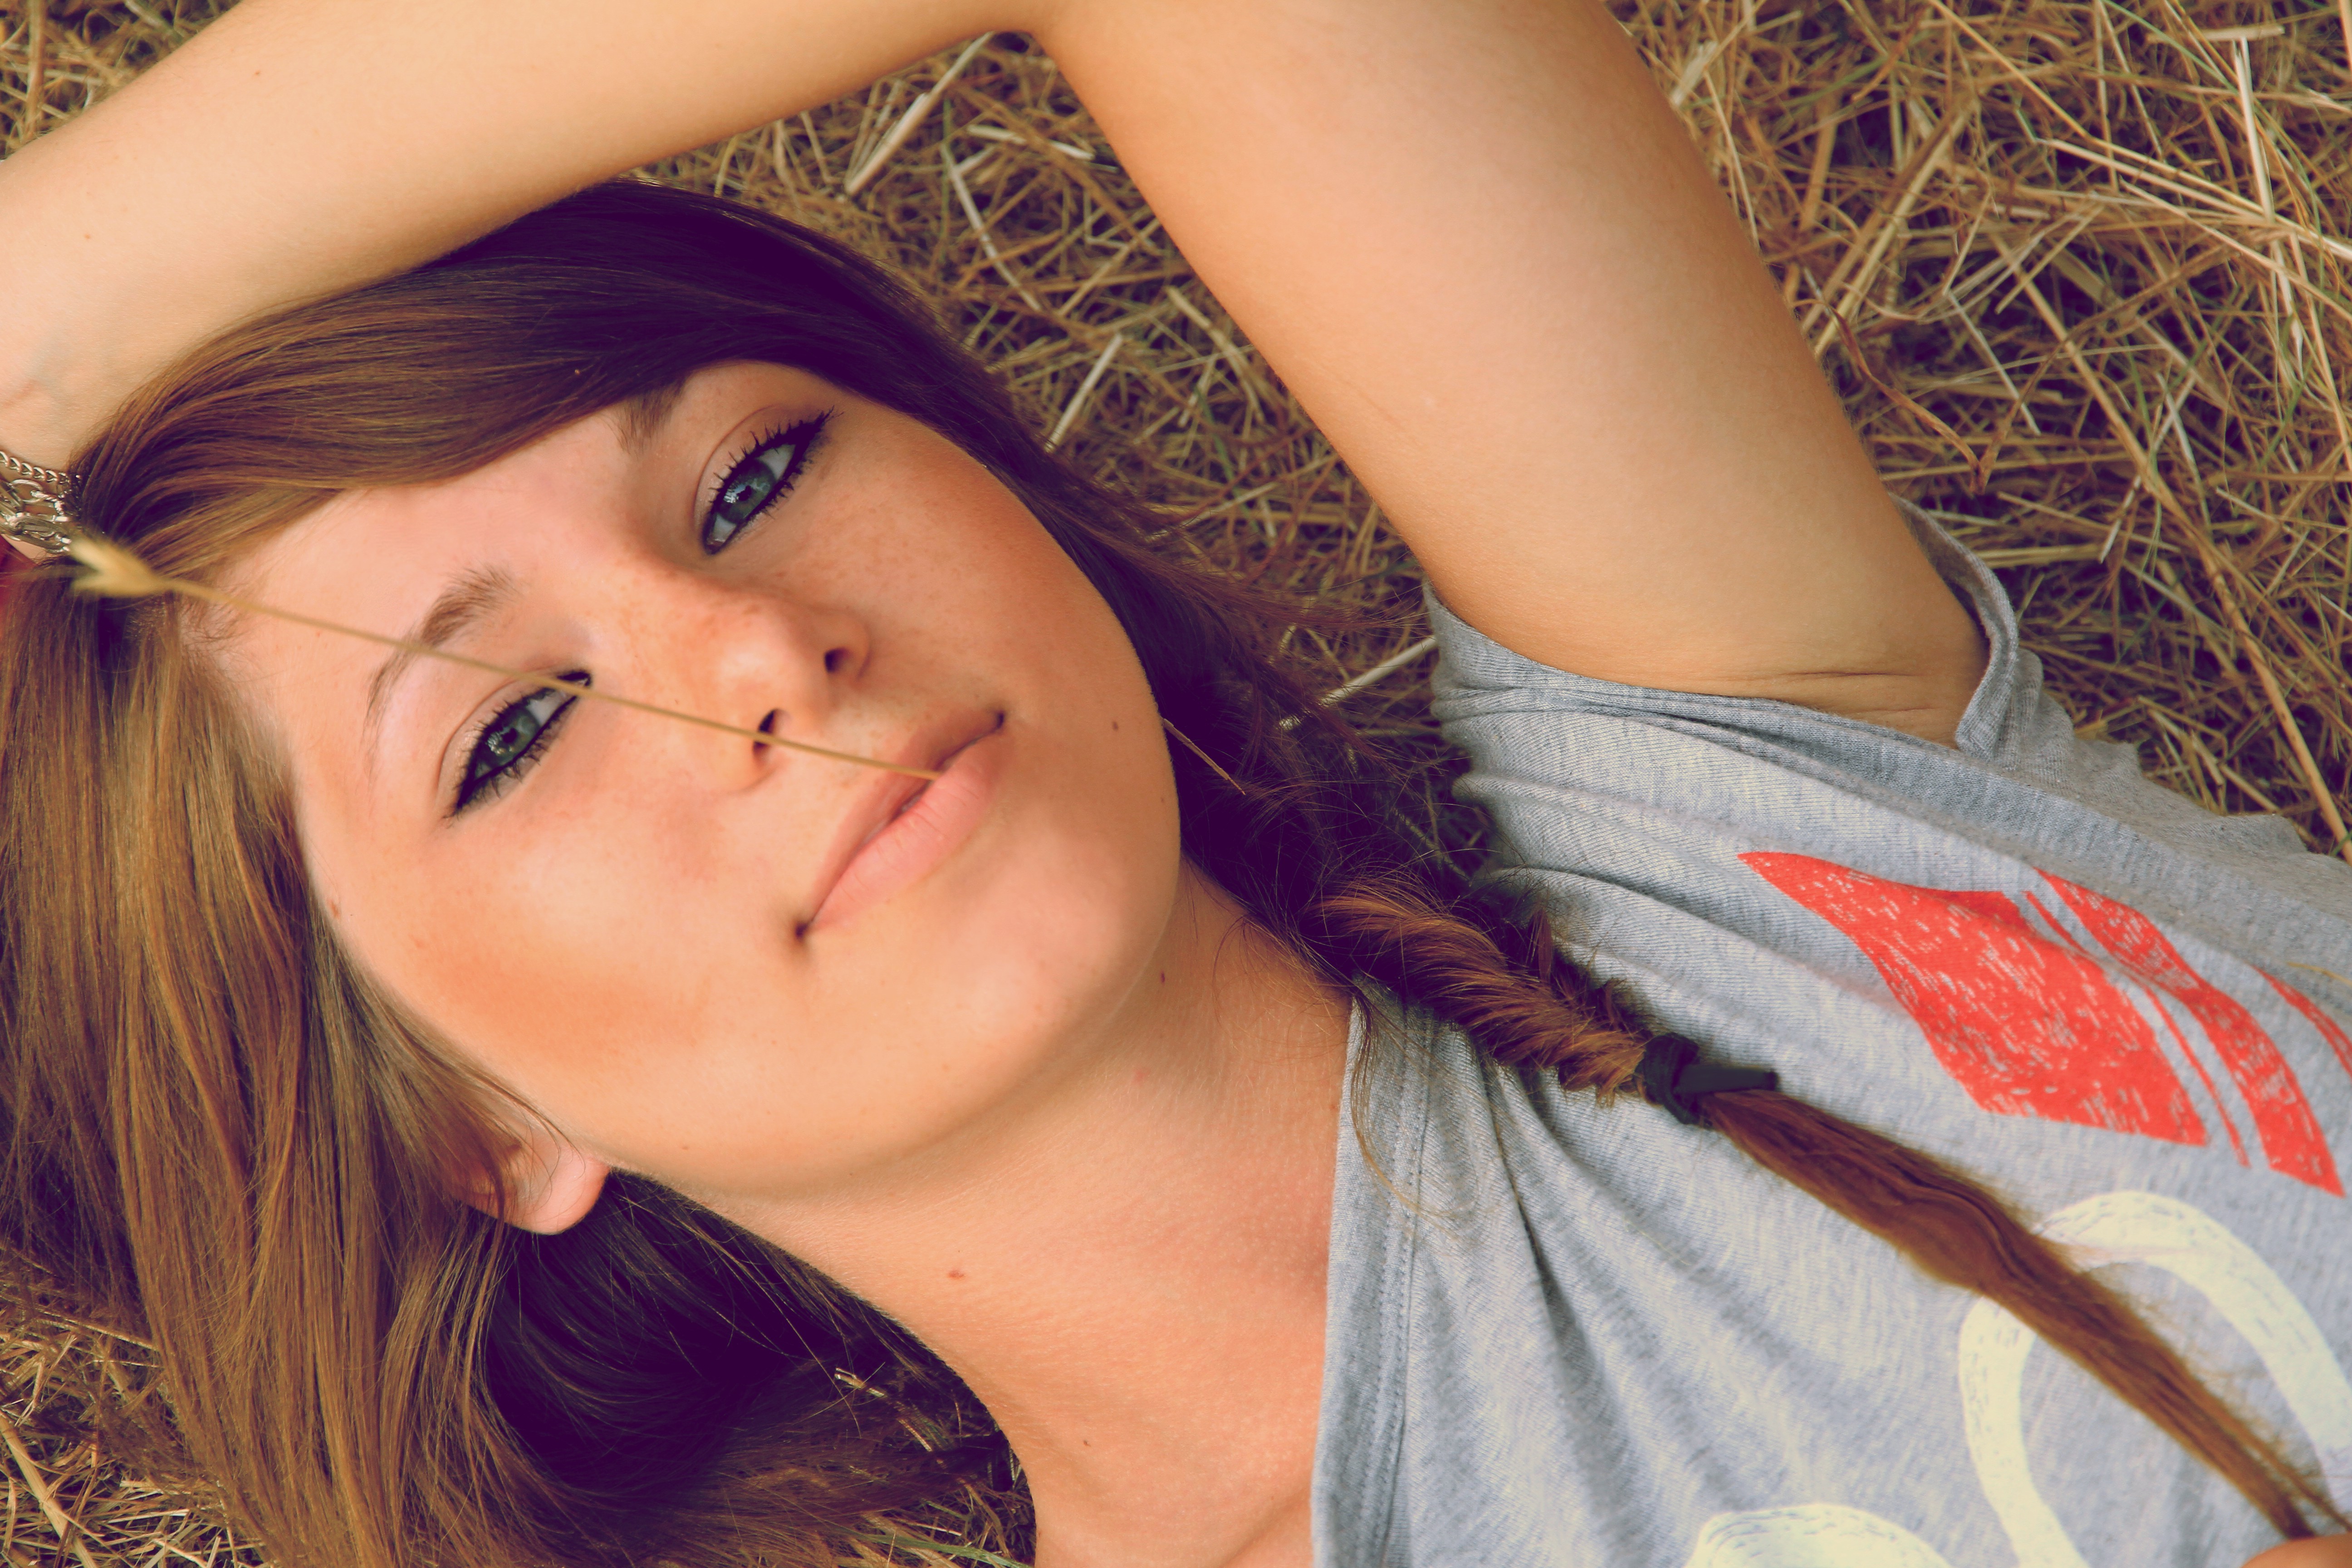 women, Model, Brunette, Long Hair, Women Outdoors, Nature, Face, Portrait, Lying On Back, Looking At Viewer, Spikelets, Straw, Freckles, Hands On Head, T shirt, Smiling, Braids Wallpaper